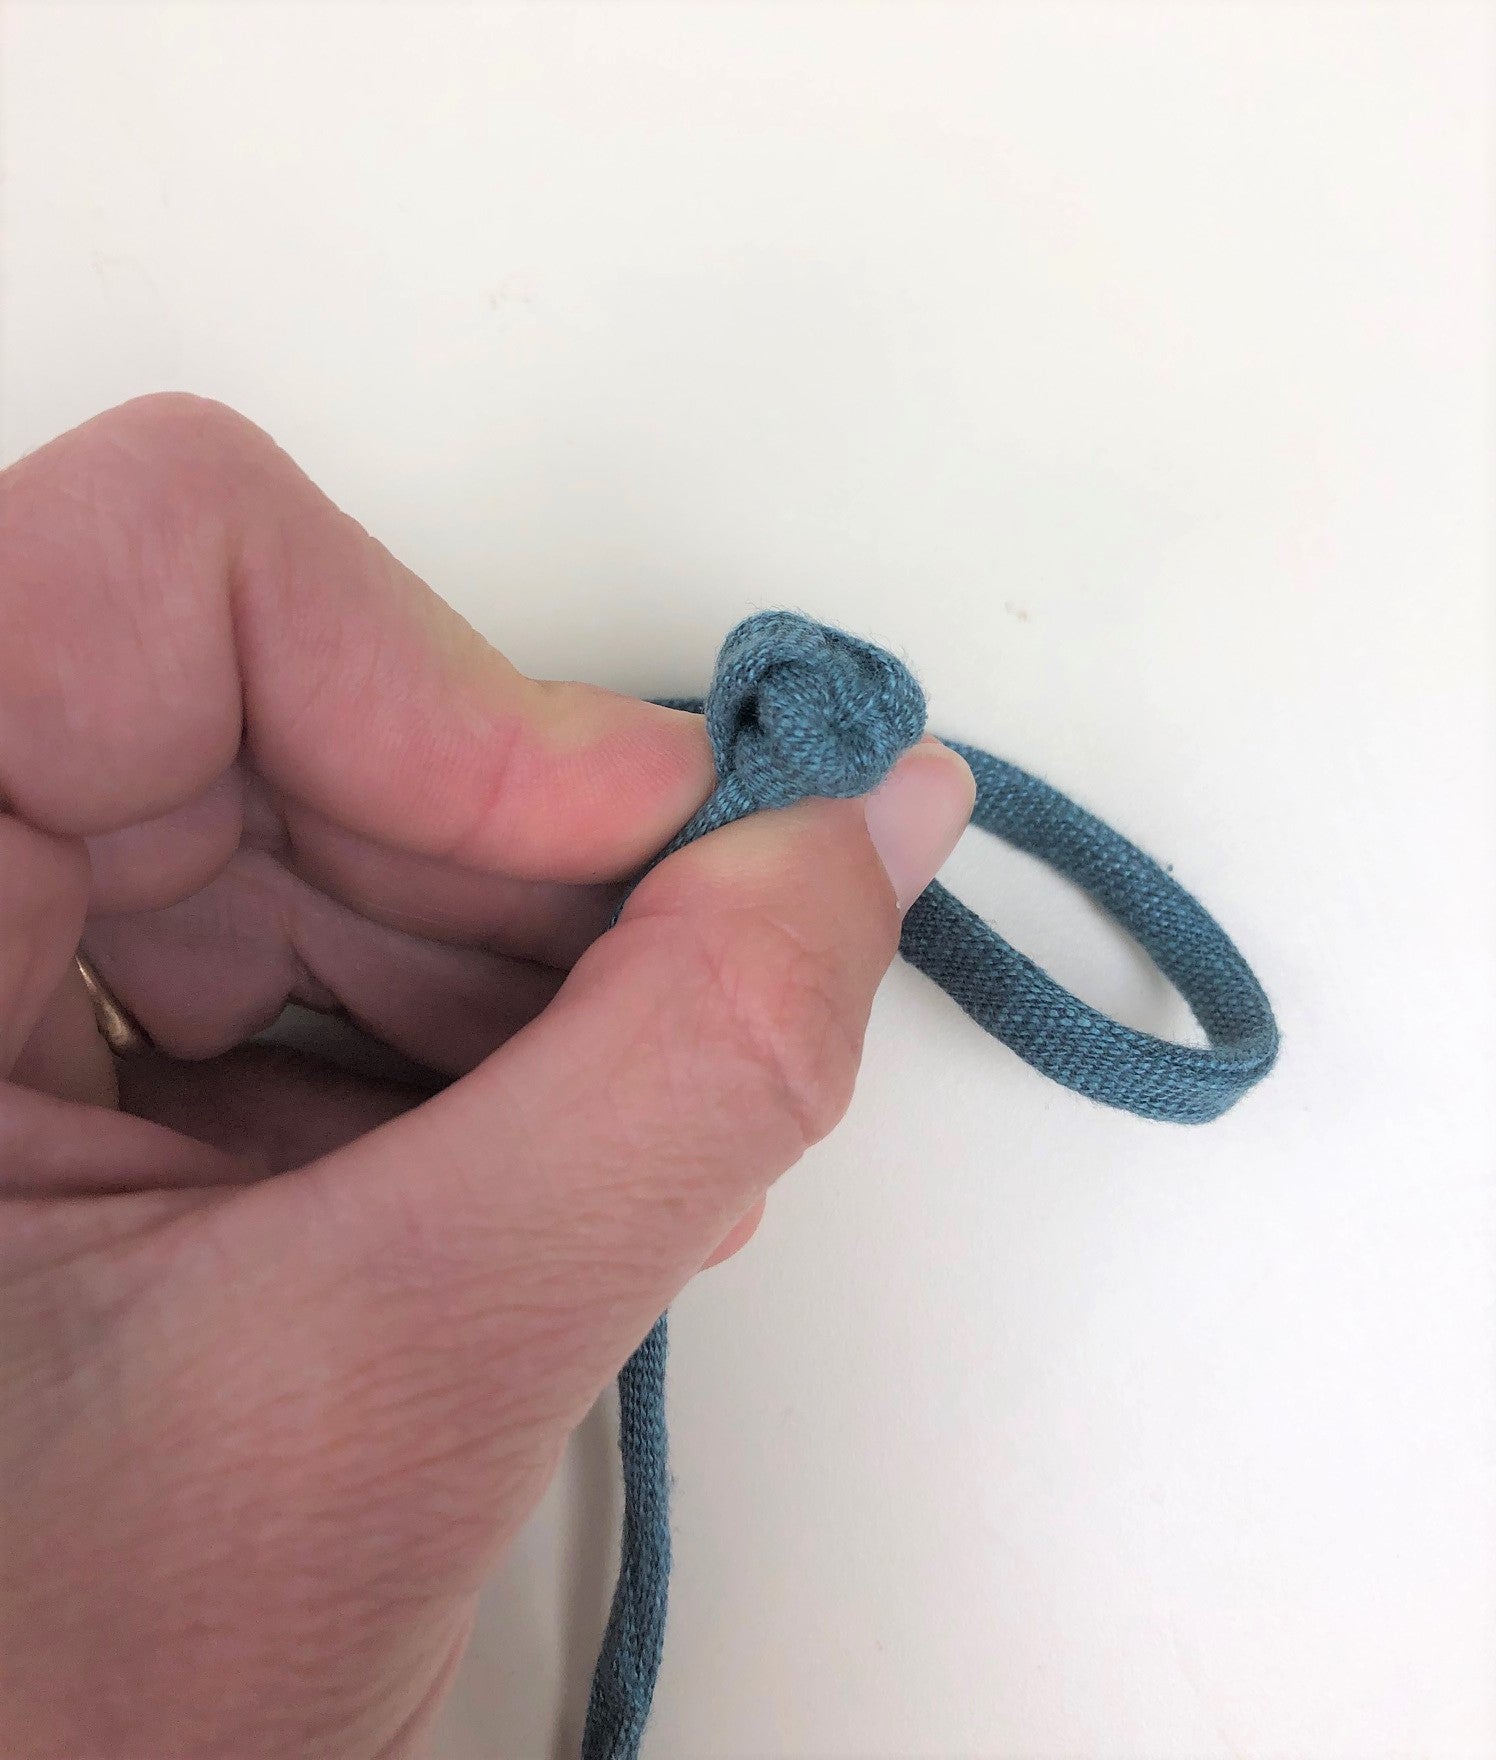 Handmade cording and knotted buttons - how to